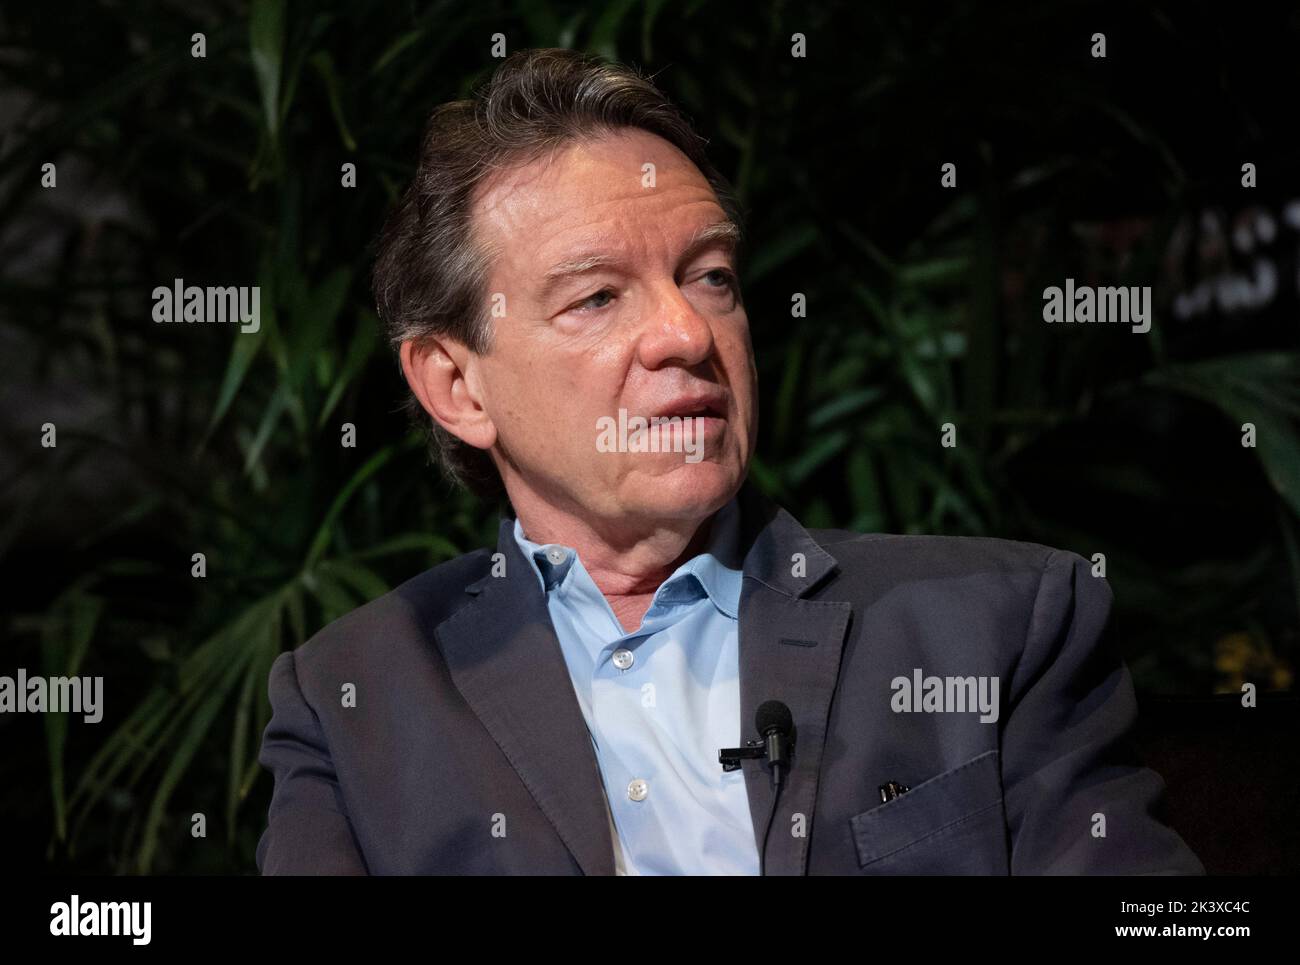 Author, playwright and staff writer for the New Yorker magazine LAWRENCE WRIGHT during an interview session with Beto O'Rourke (not shown) at the annual Texas Tribune Festival in downtown Austin on September 24, 2022. Stock Photo